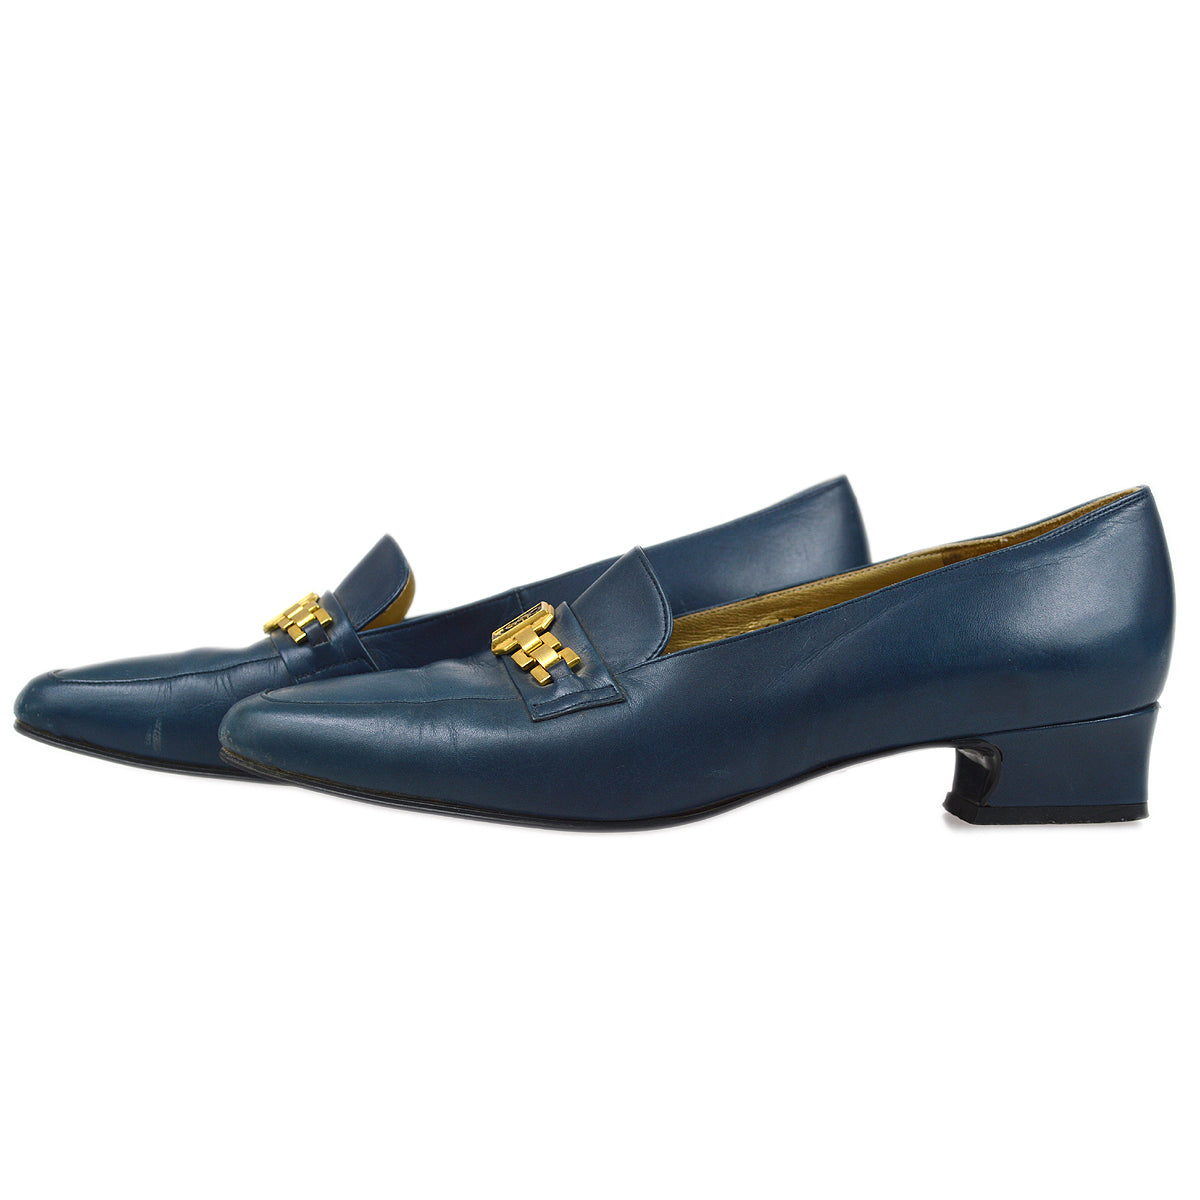 Yves Saint Laurent Loafers Shoes 